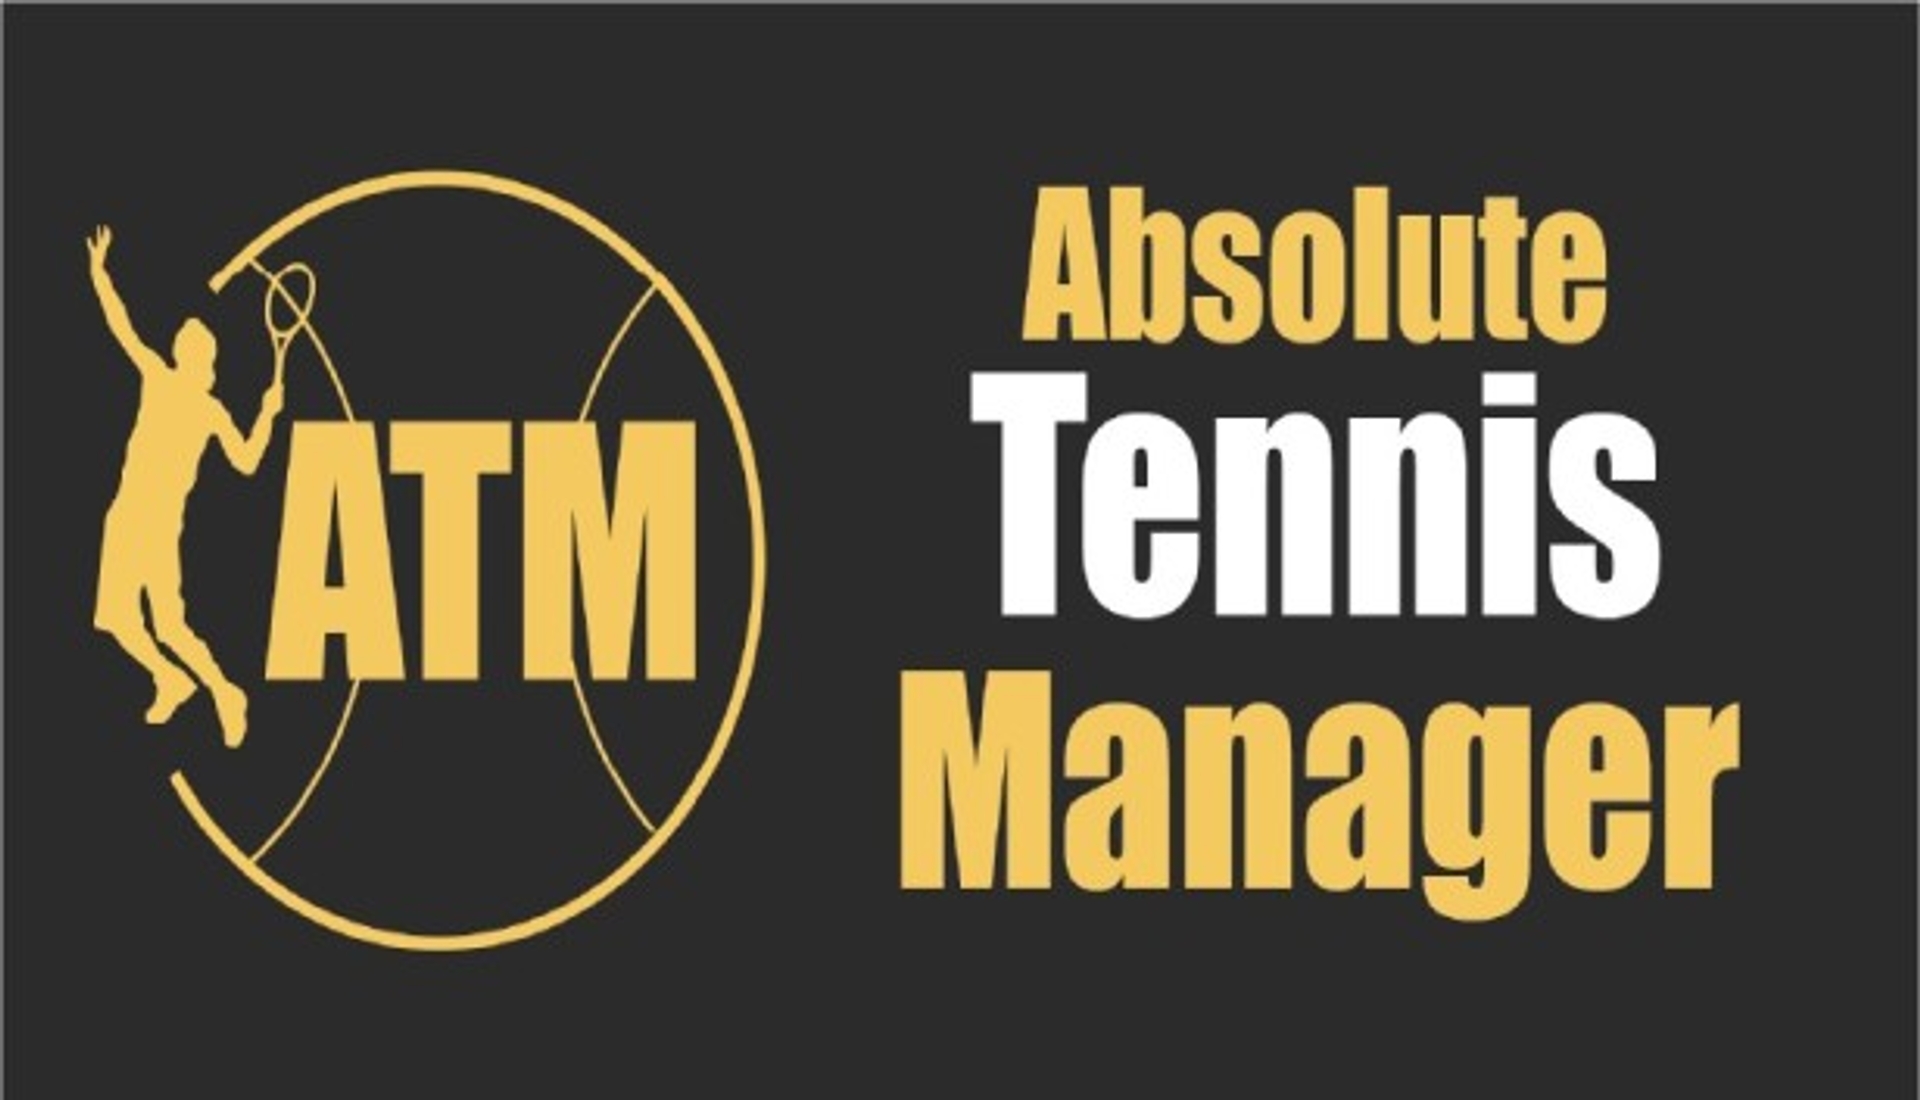 Absolute Tennis Manager. Absolute name